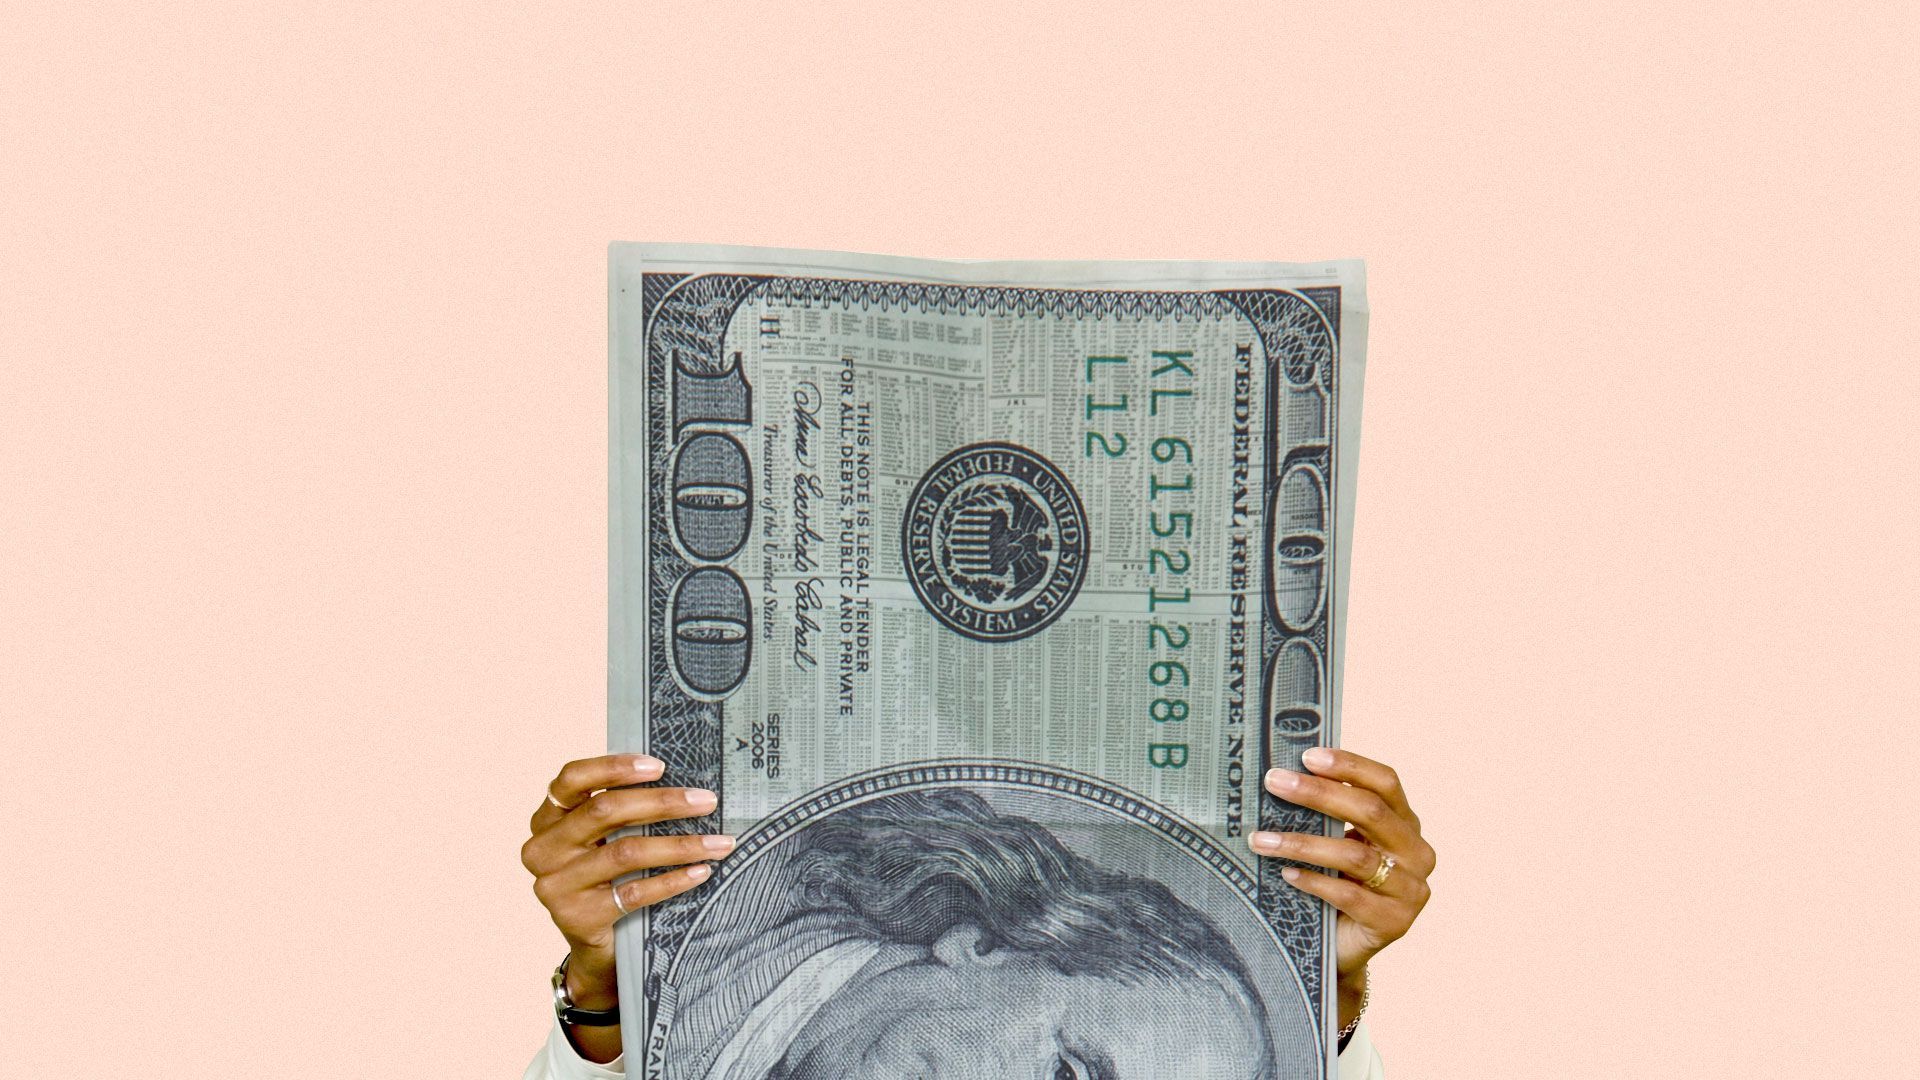 Illustration of a person holding money